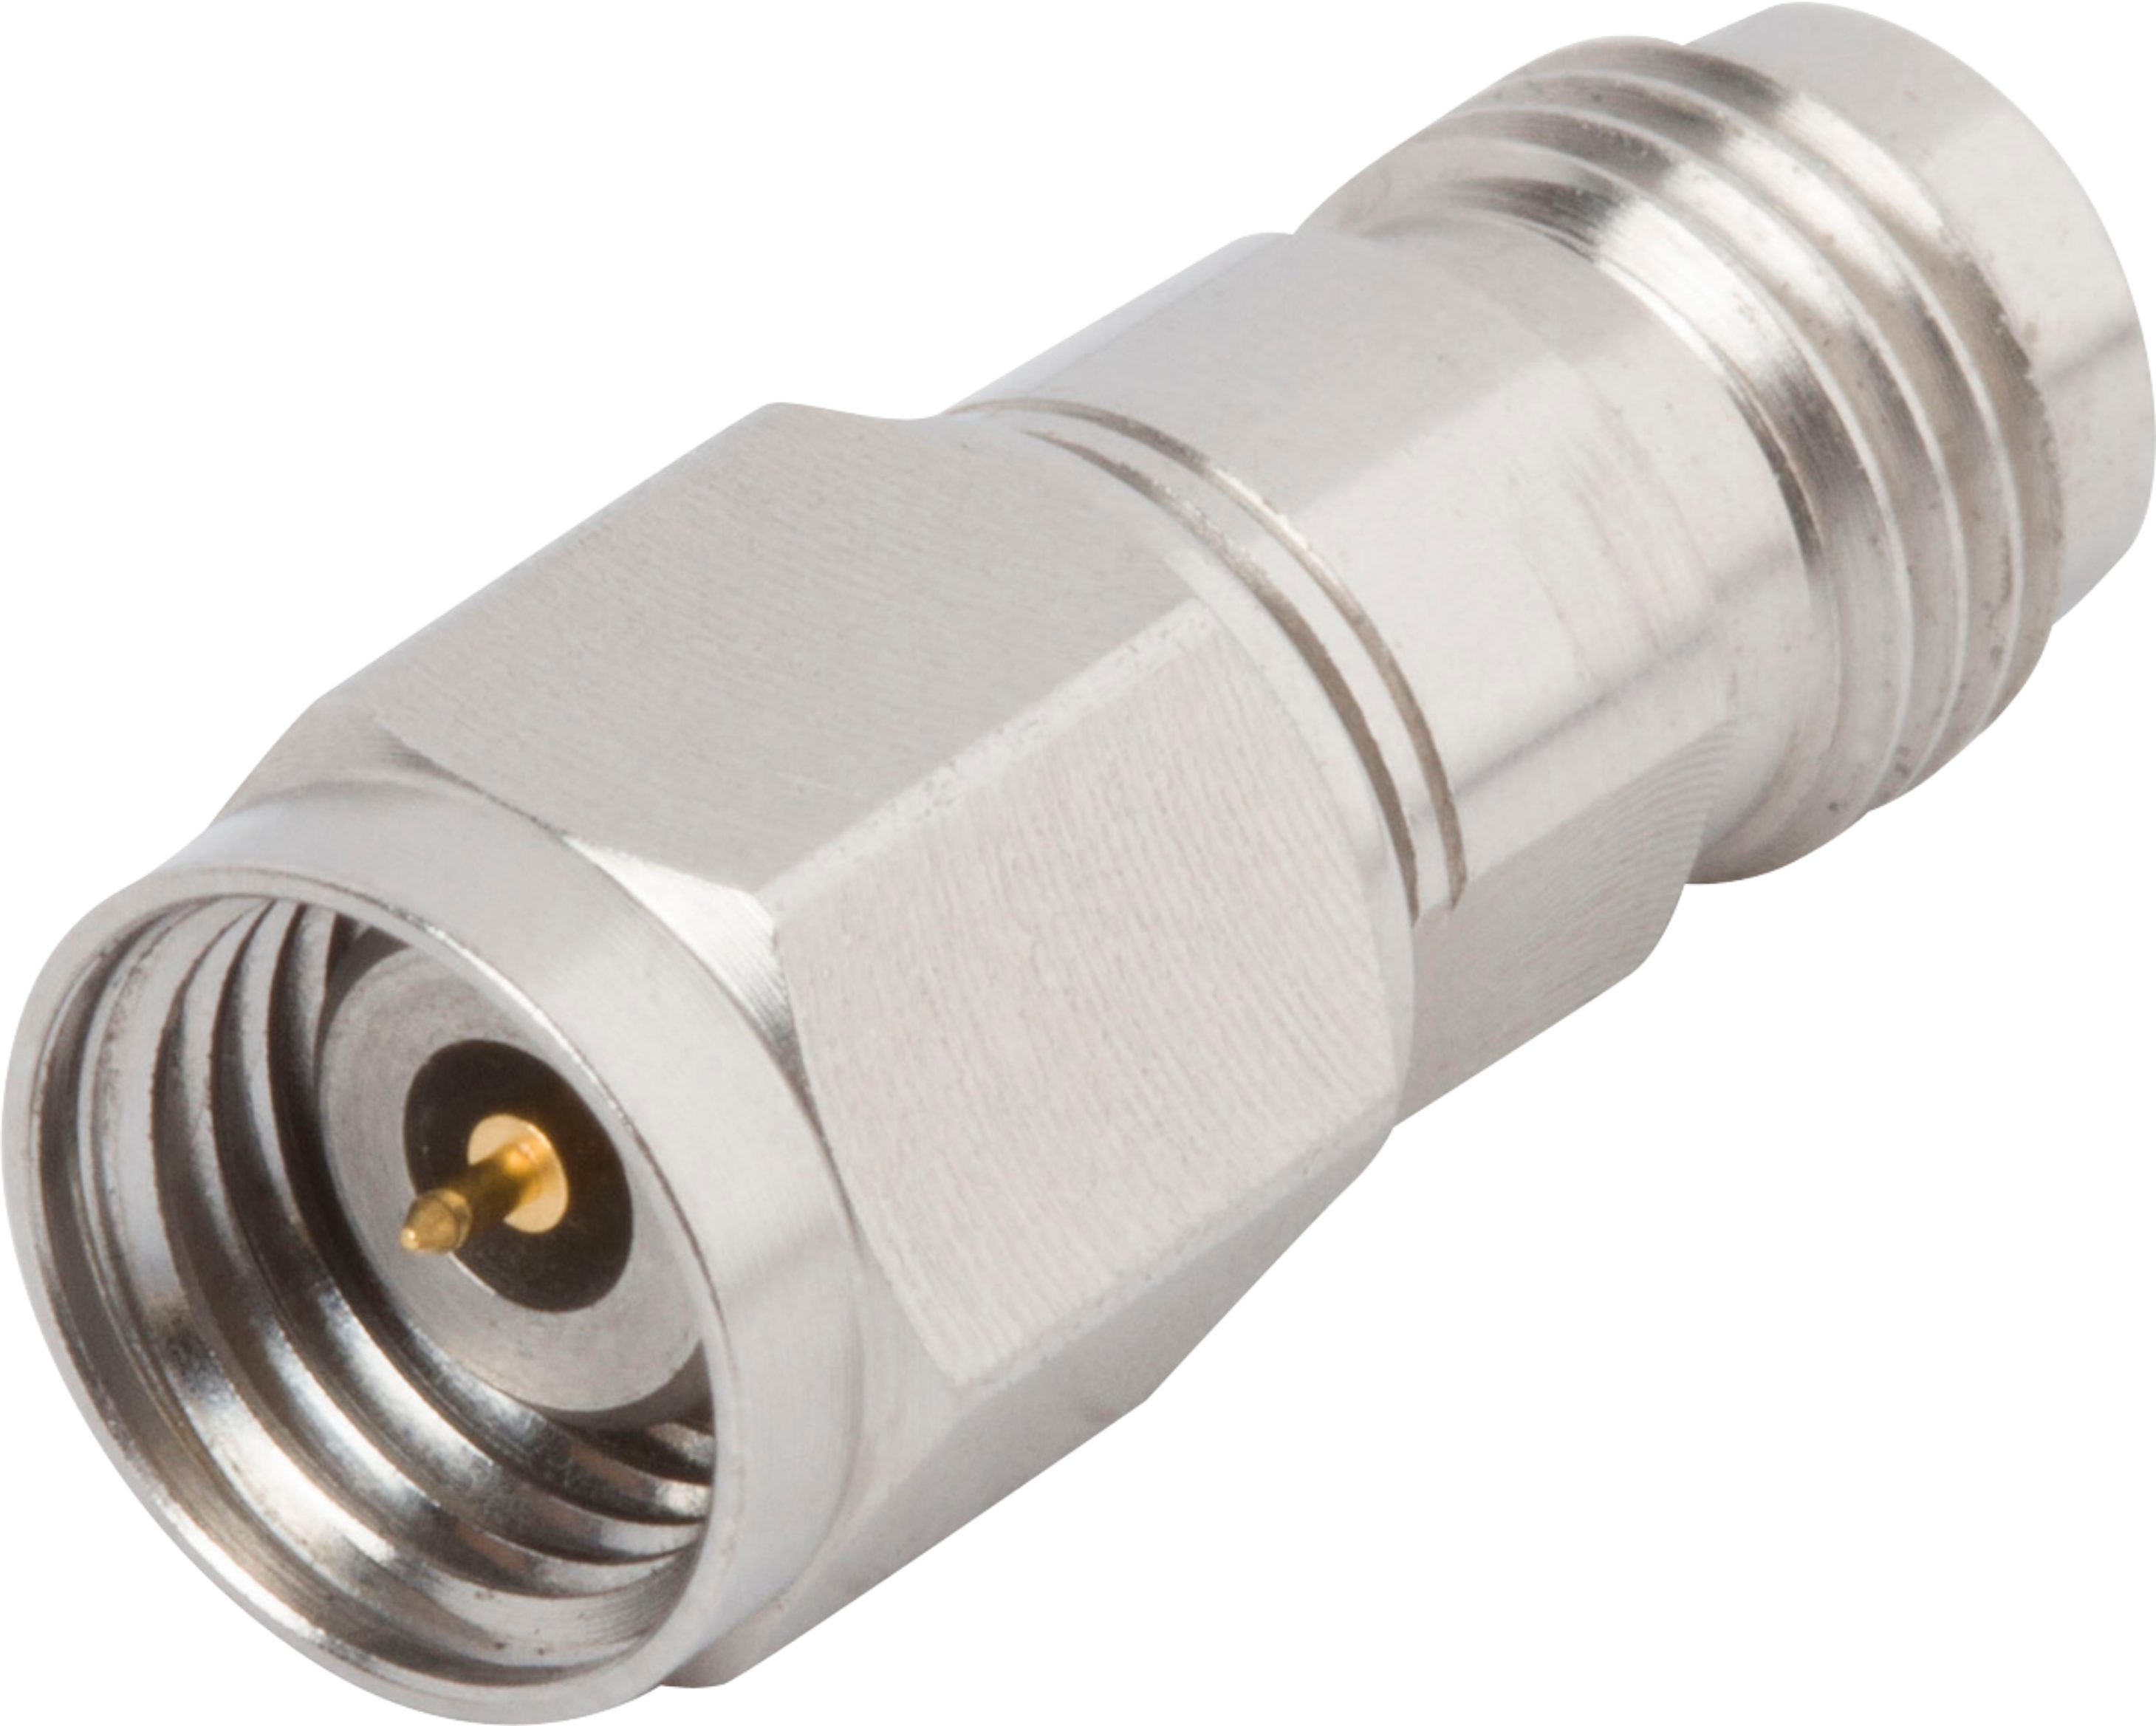 1.85mm Male to 2.4mm Female Adapter, SF1133-6004